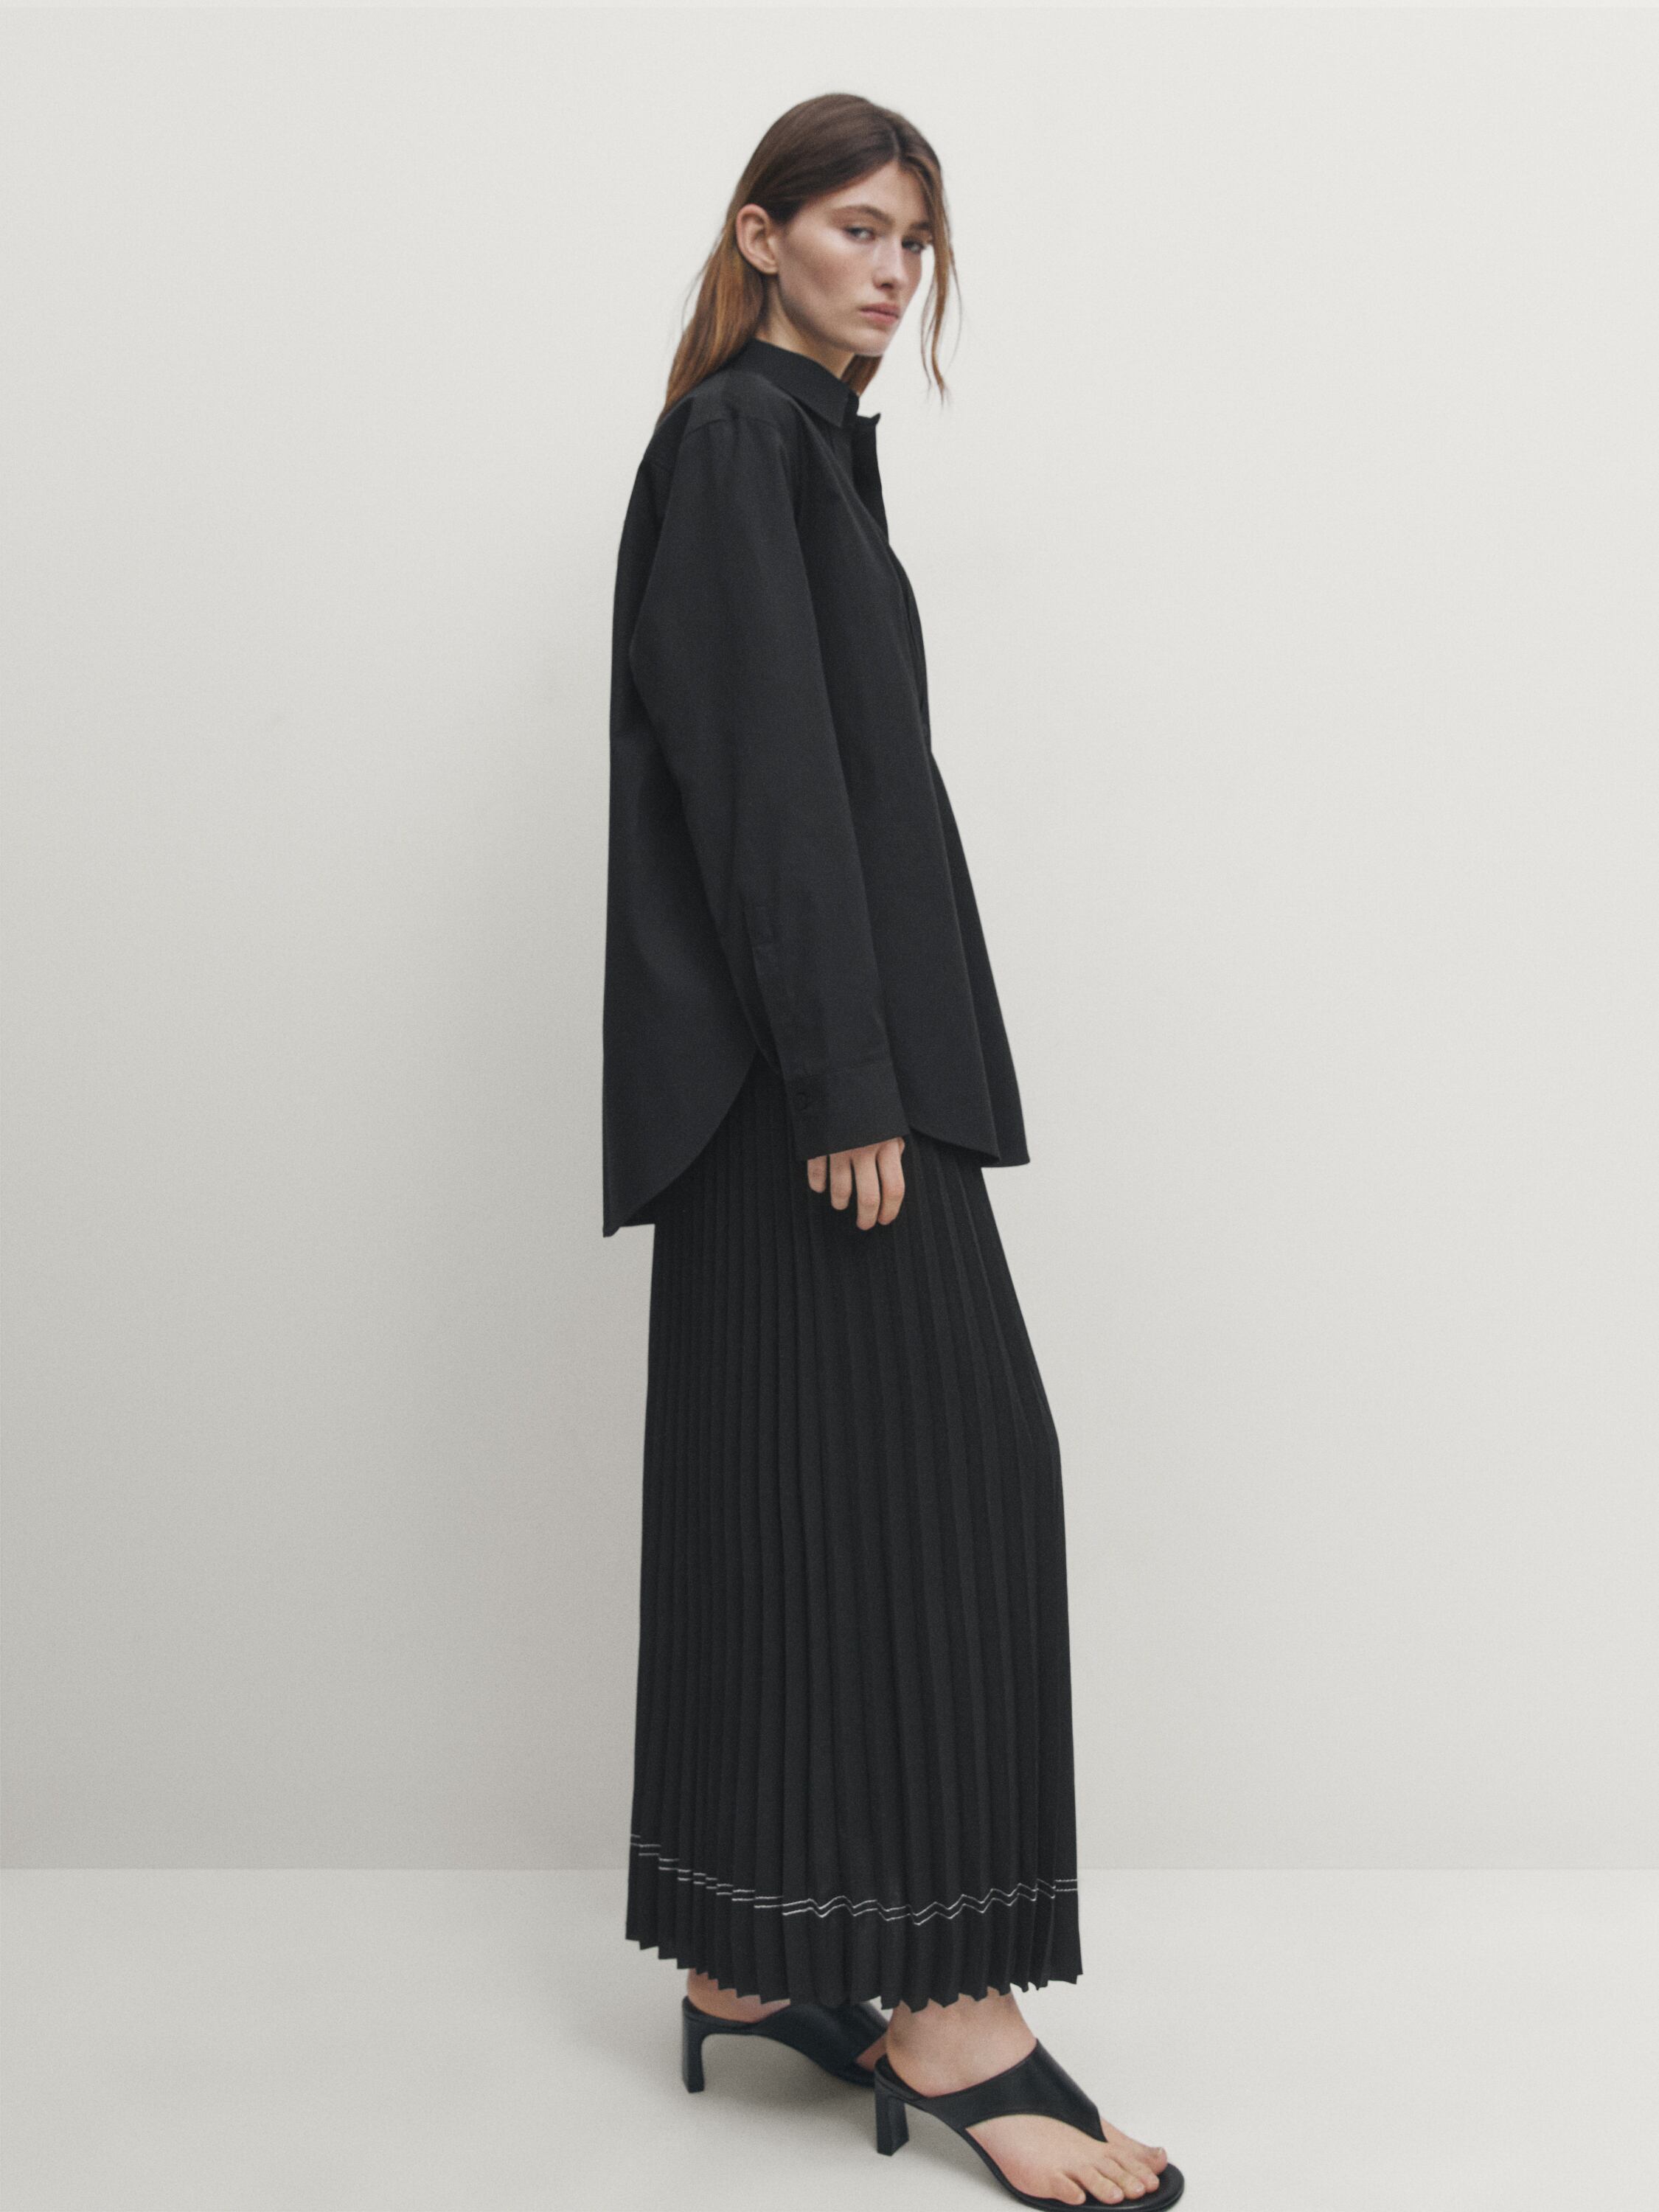 Pleated skirt with laces